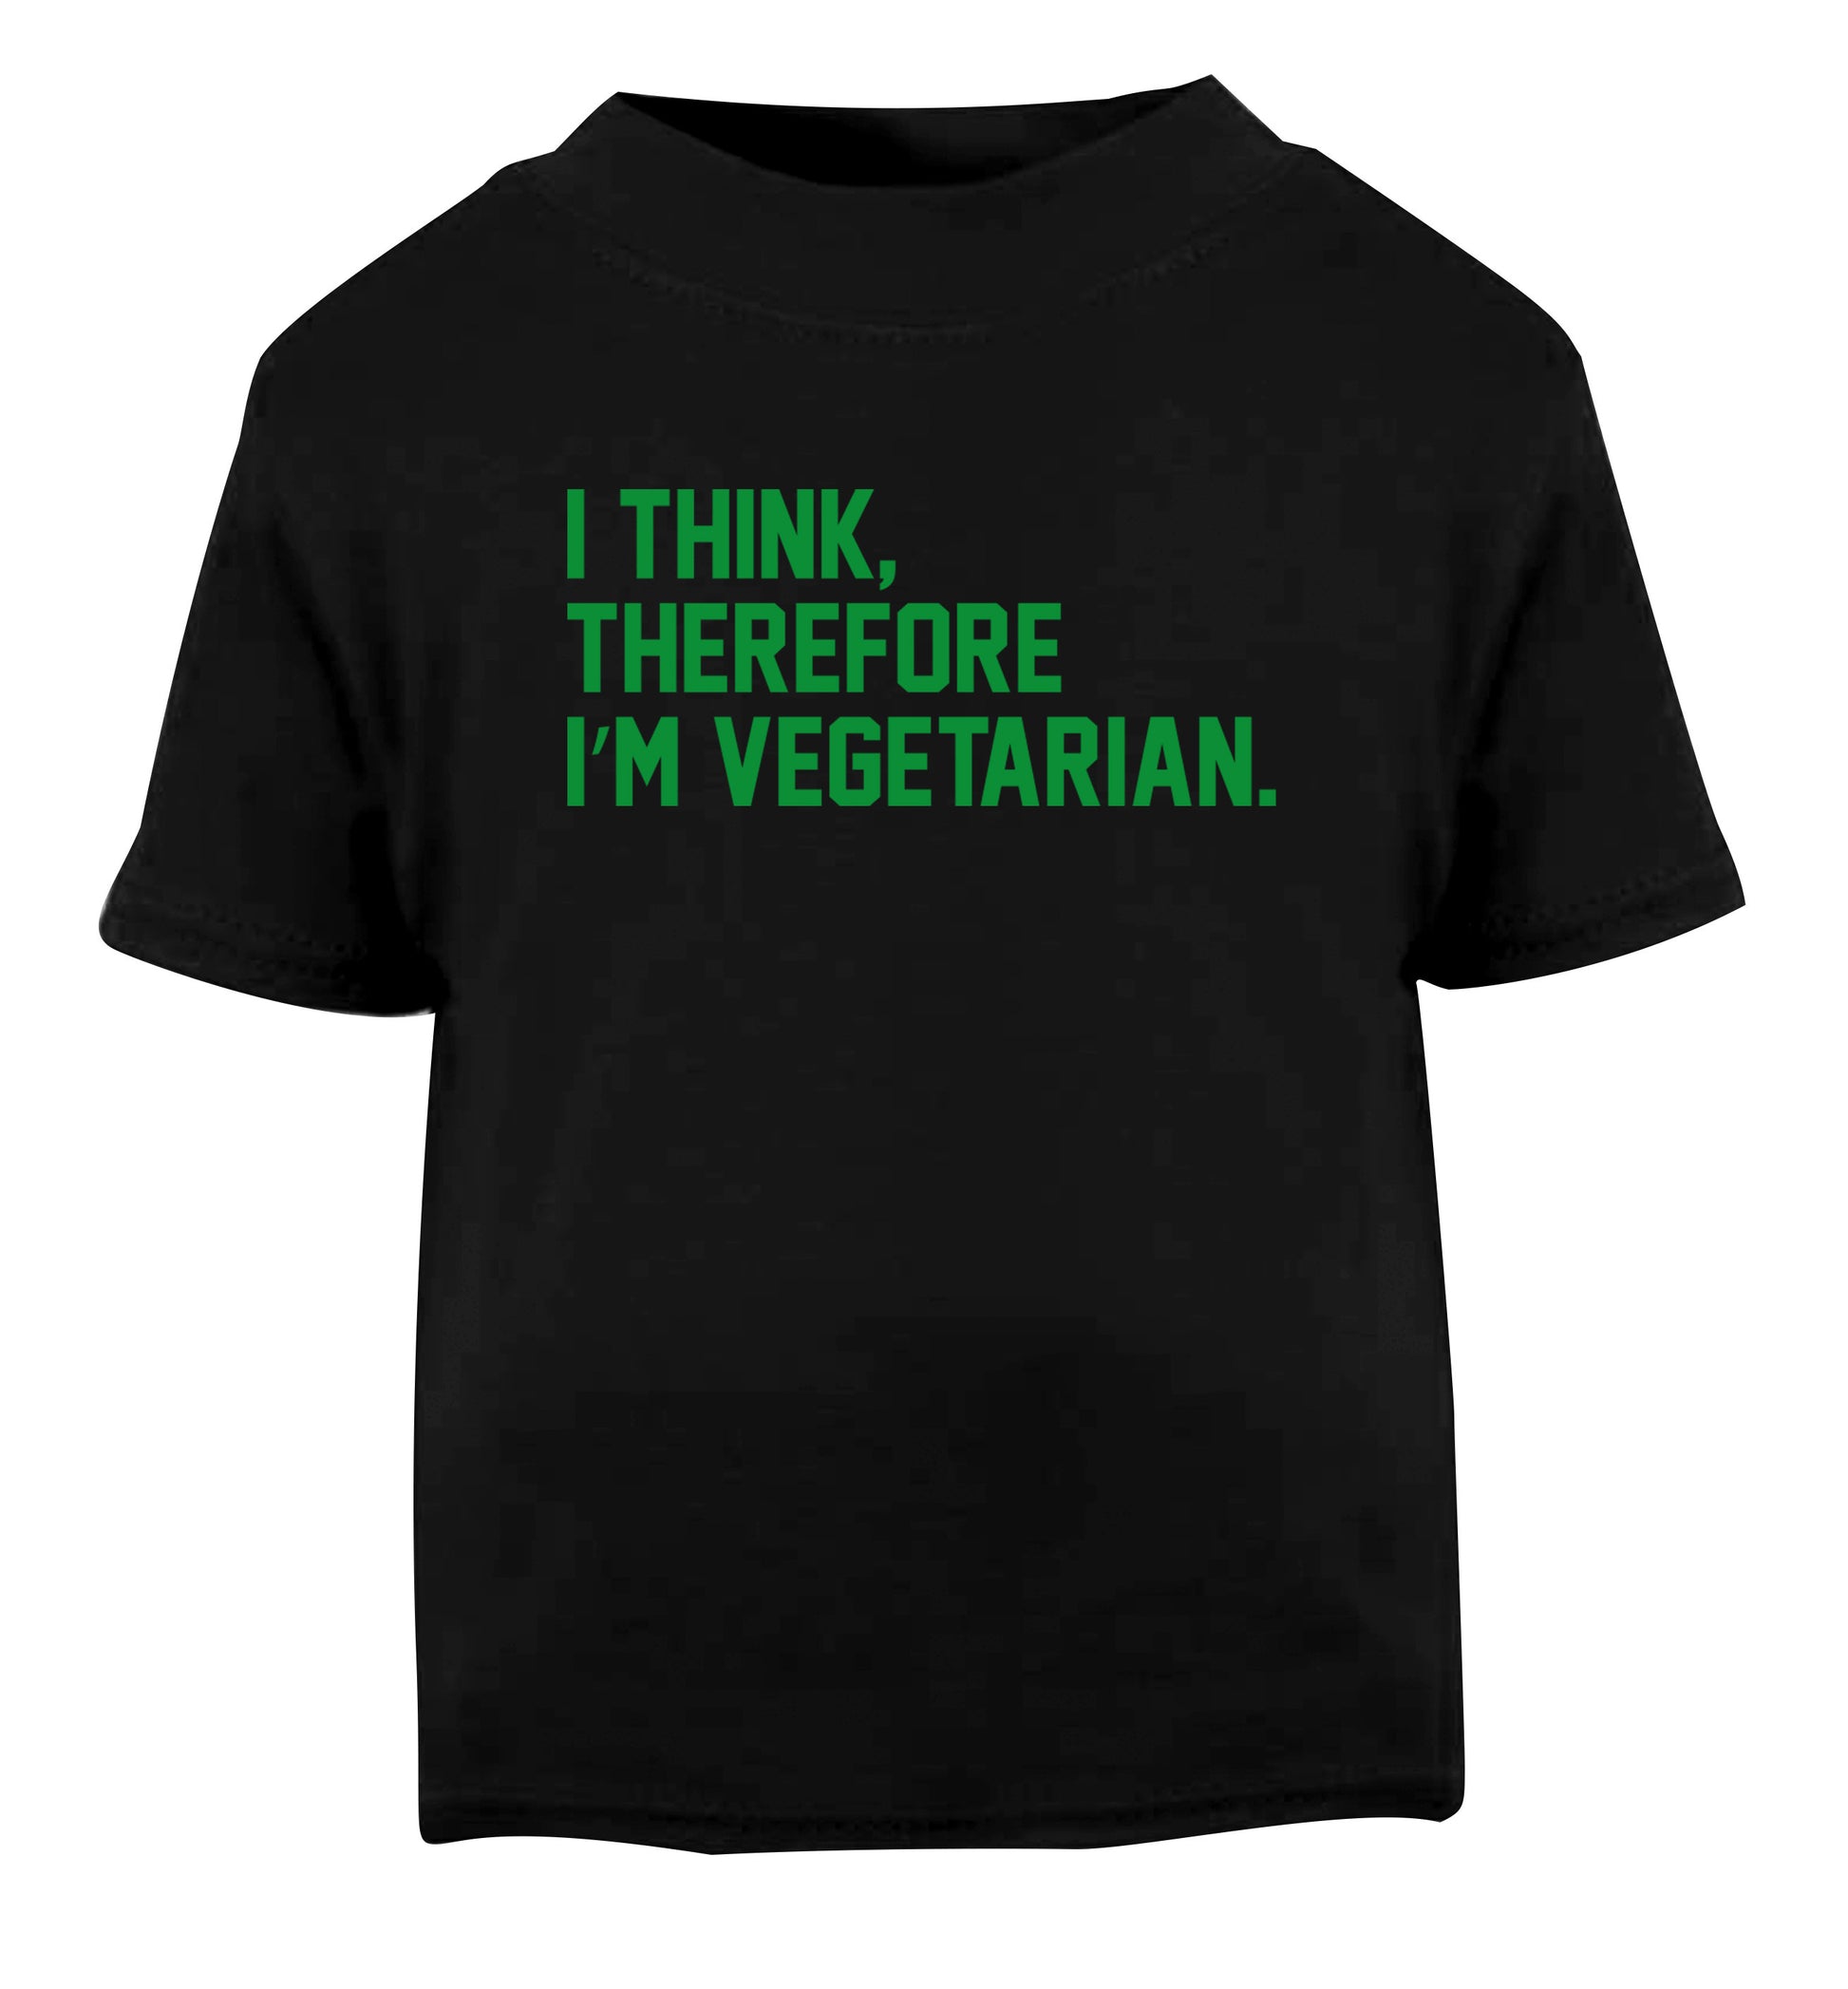 I think therefore I'm vegetarian Black Baby Toddler Tshirt 2 years